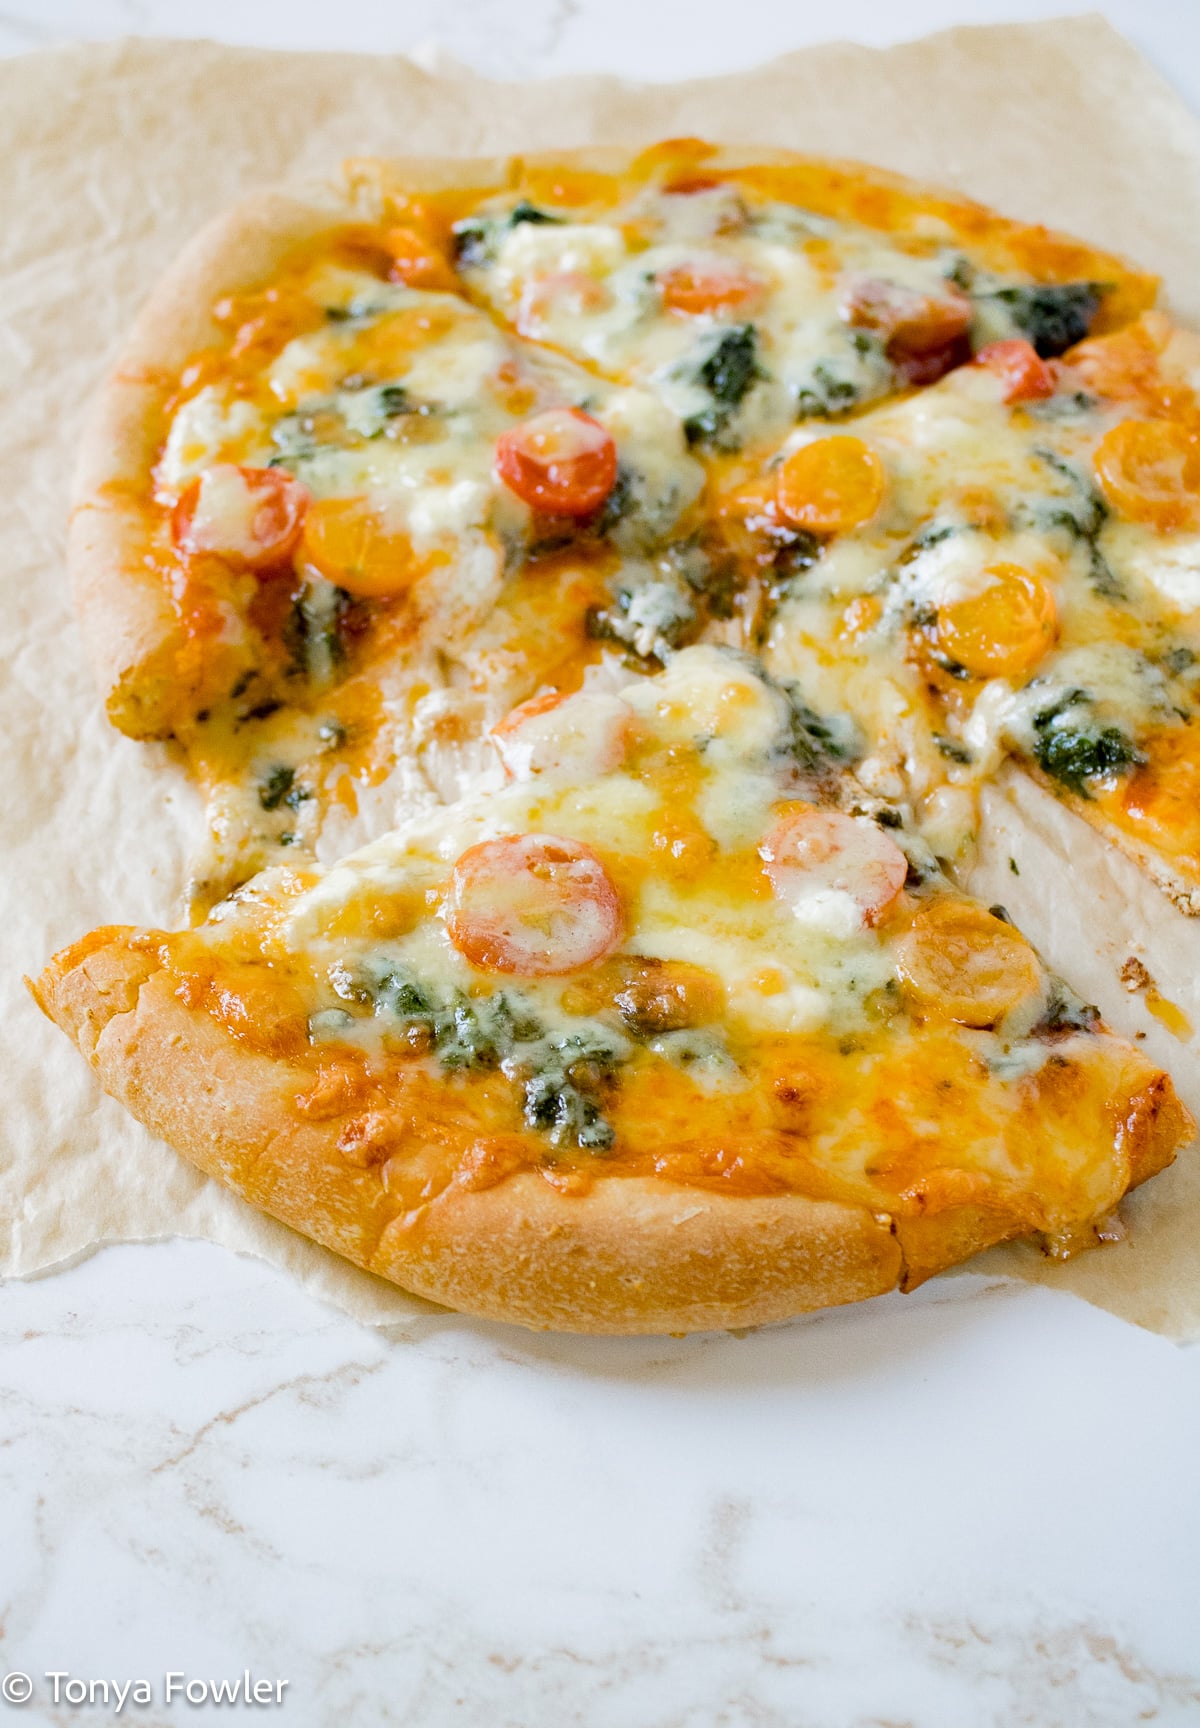 Spinach goat cheese pizza on cornmeal crust.